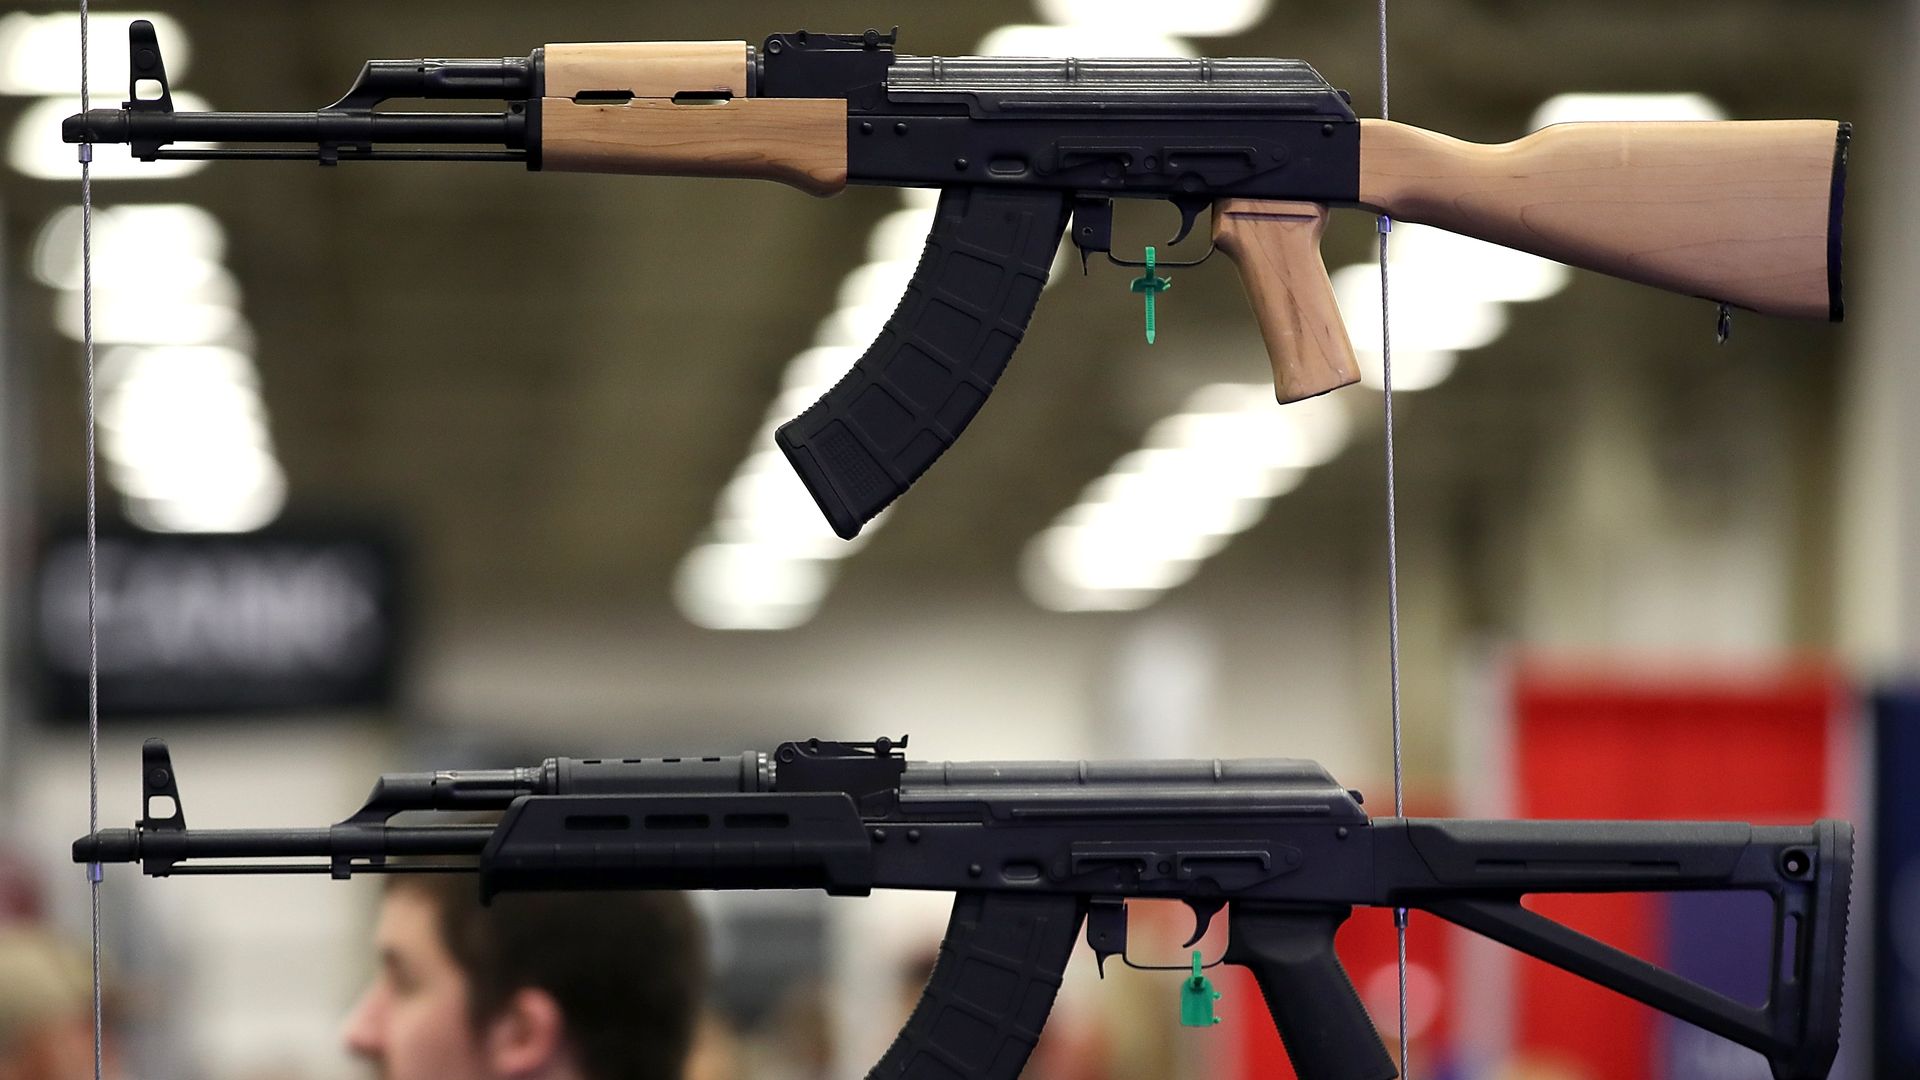 Firearms on display during the NRA Annual Meeting & Exhibits at the Kay Bailey Hutchison Convention Center  in Dallas, Texas. Photo: Justin Sullivan/Getty Images